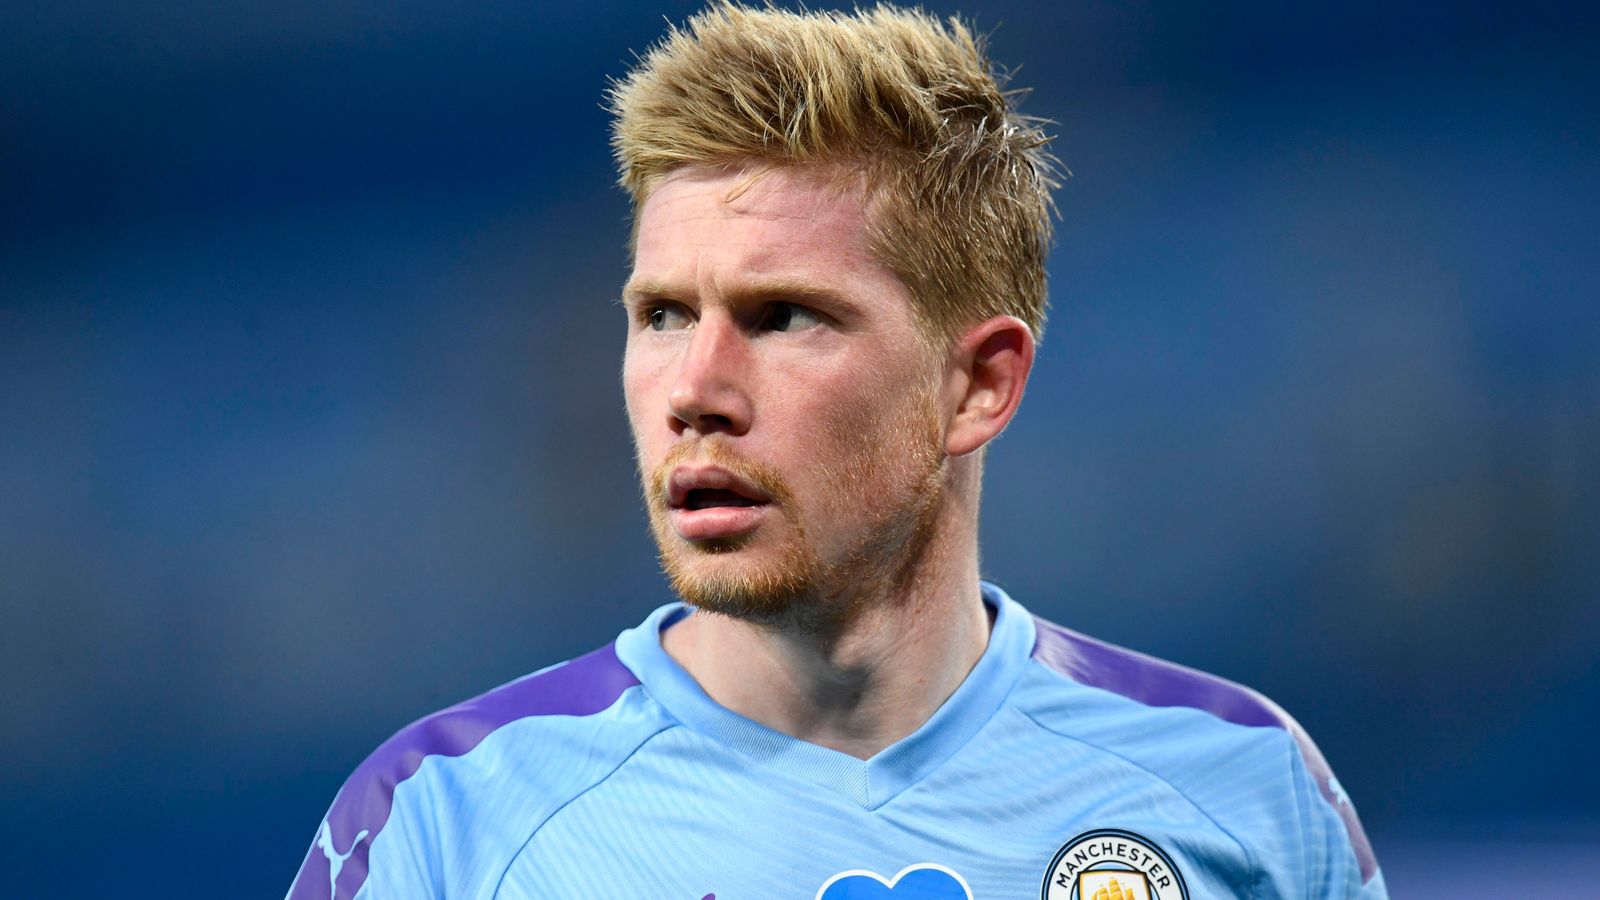 Kevin De Bruyne was the star as Manchester City thrashed Liverpool | Football News | Sky Sports